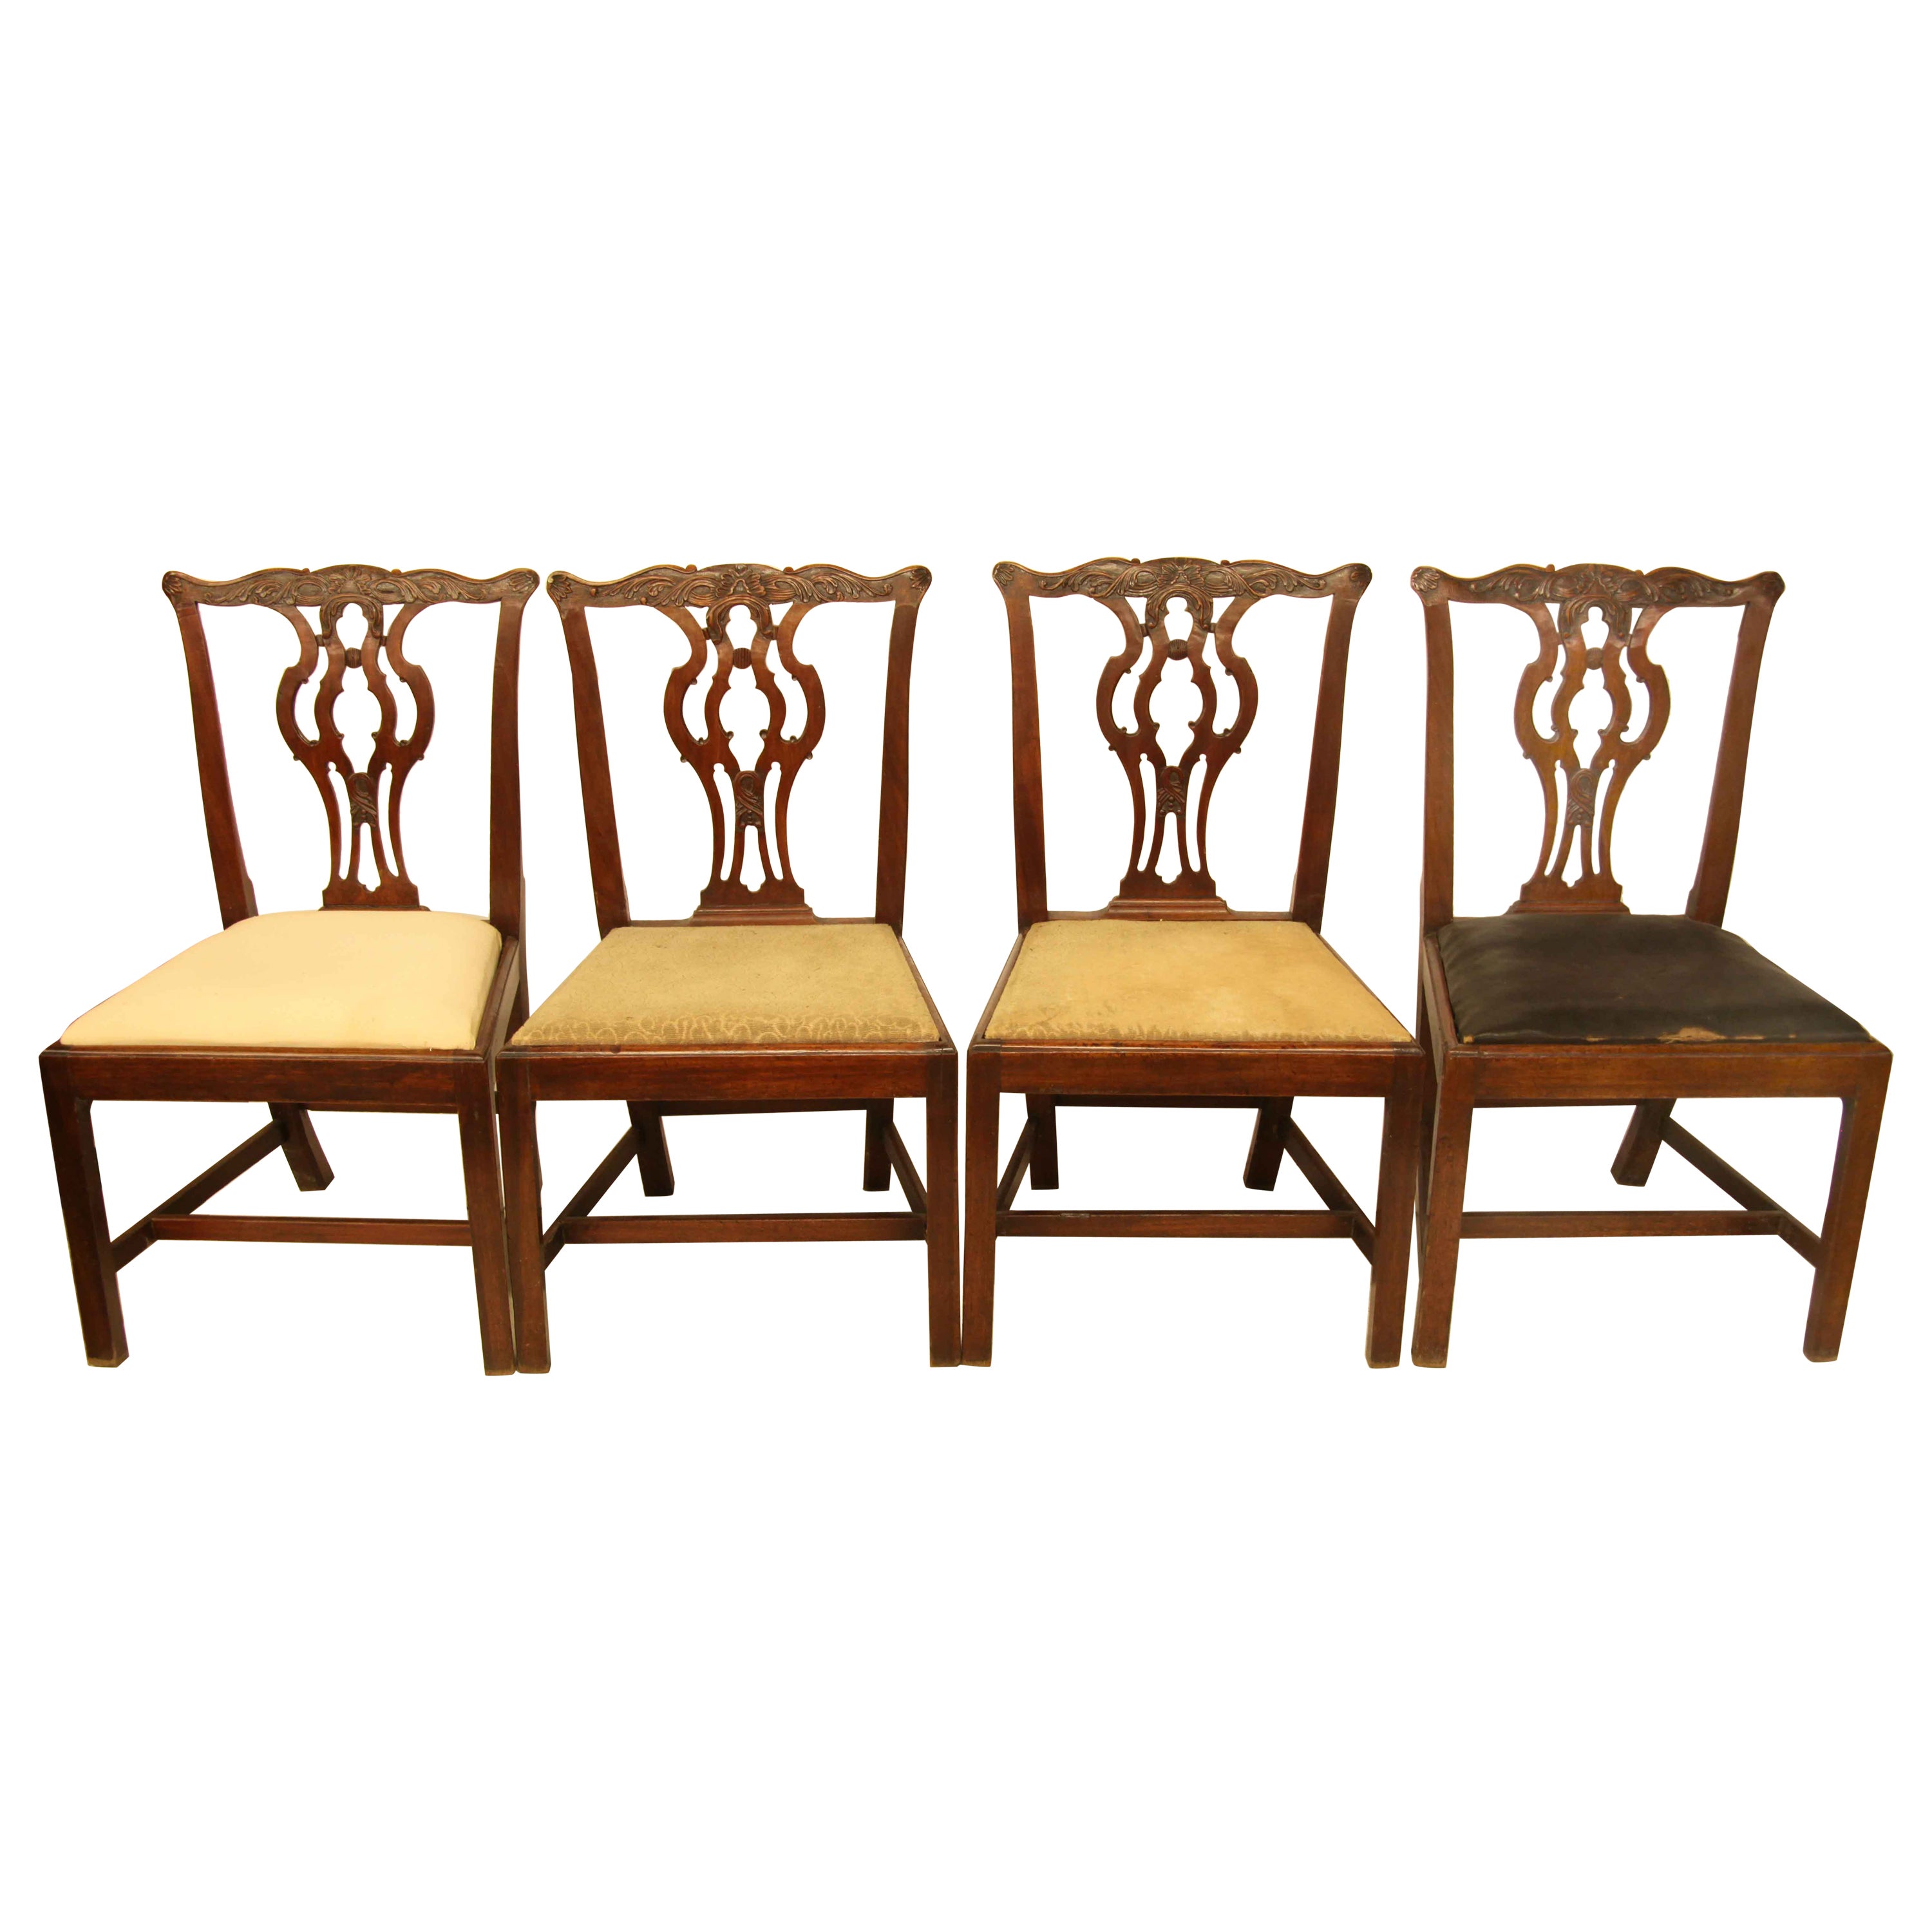 Set of Four 18th Century Chippendale Chairs For Sale